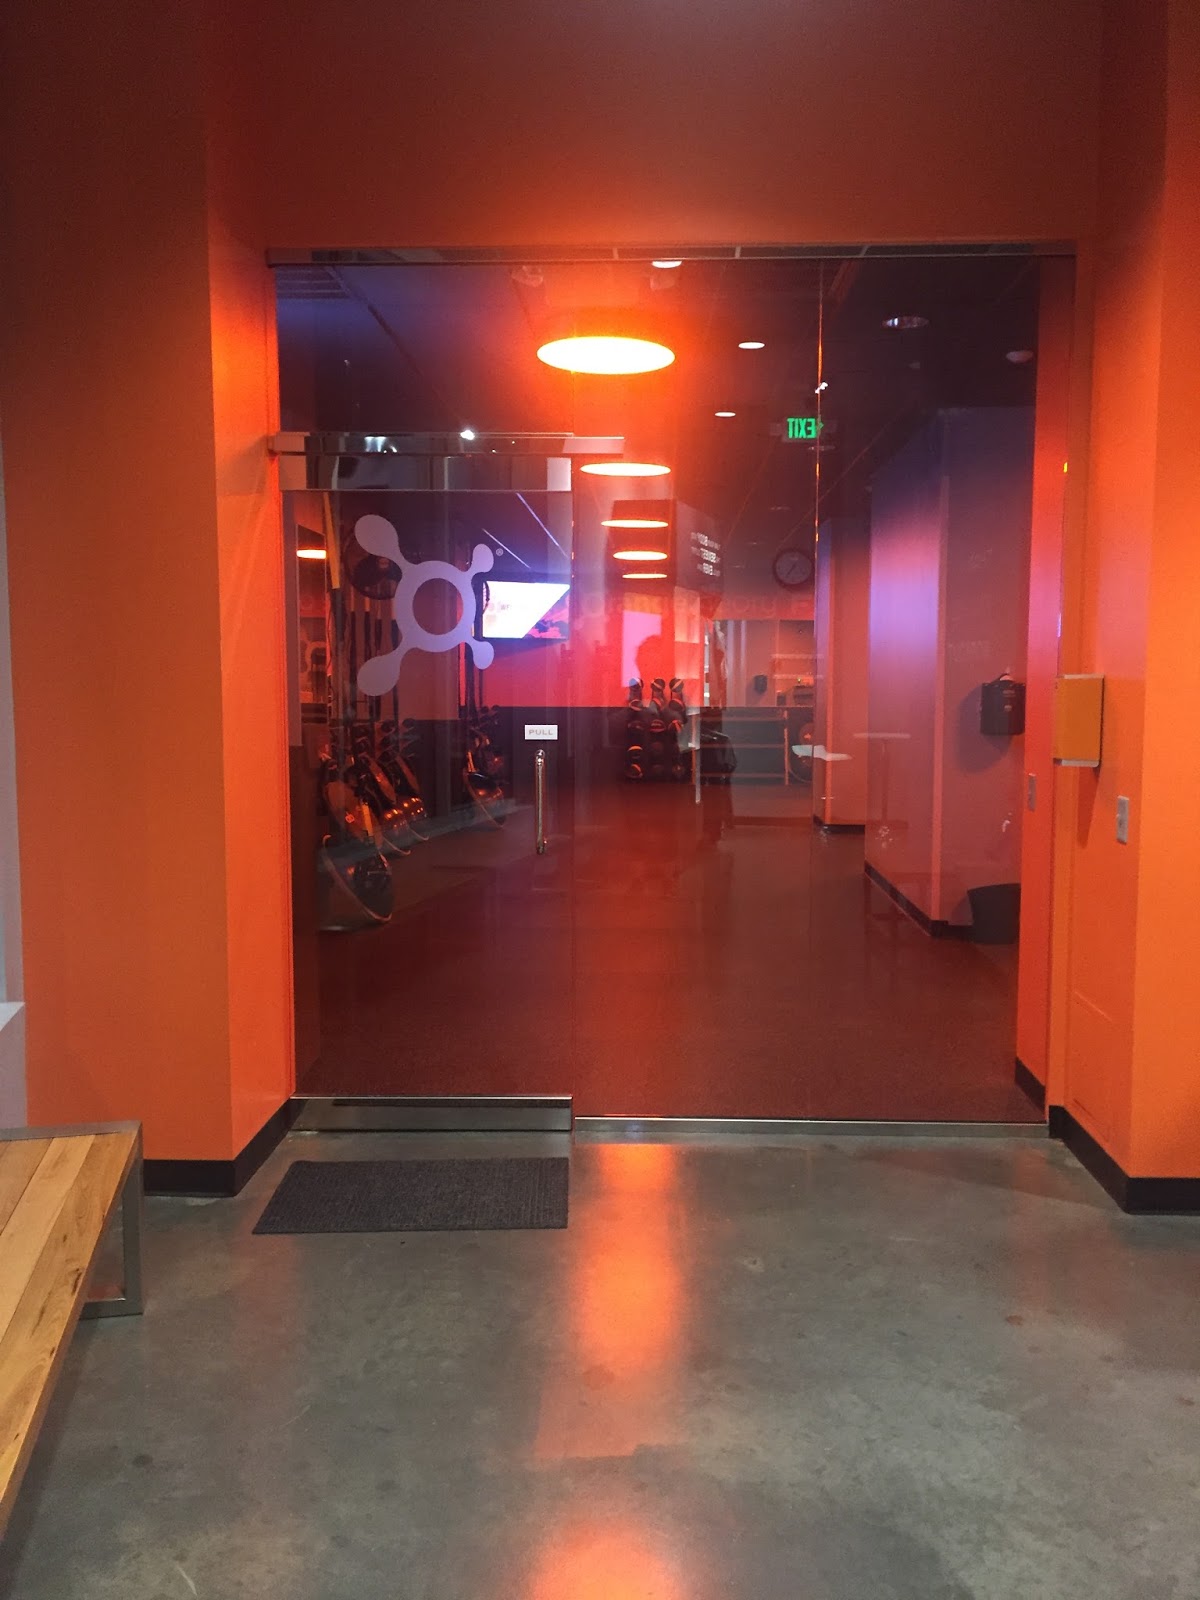 Popular North Carolina style blogger Rebecca Lately shares her experience at Orangetheory Fitness!  Click here to read more now!